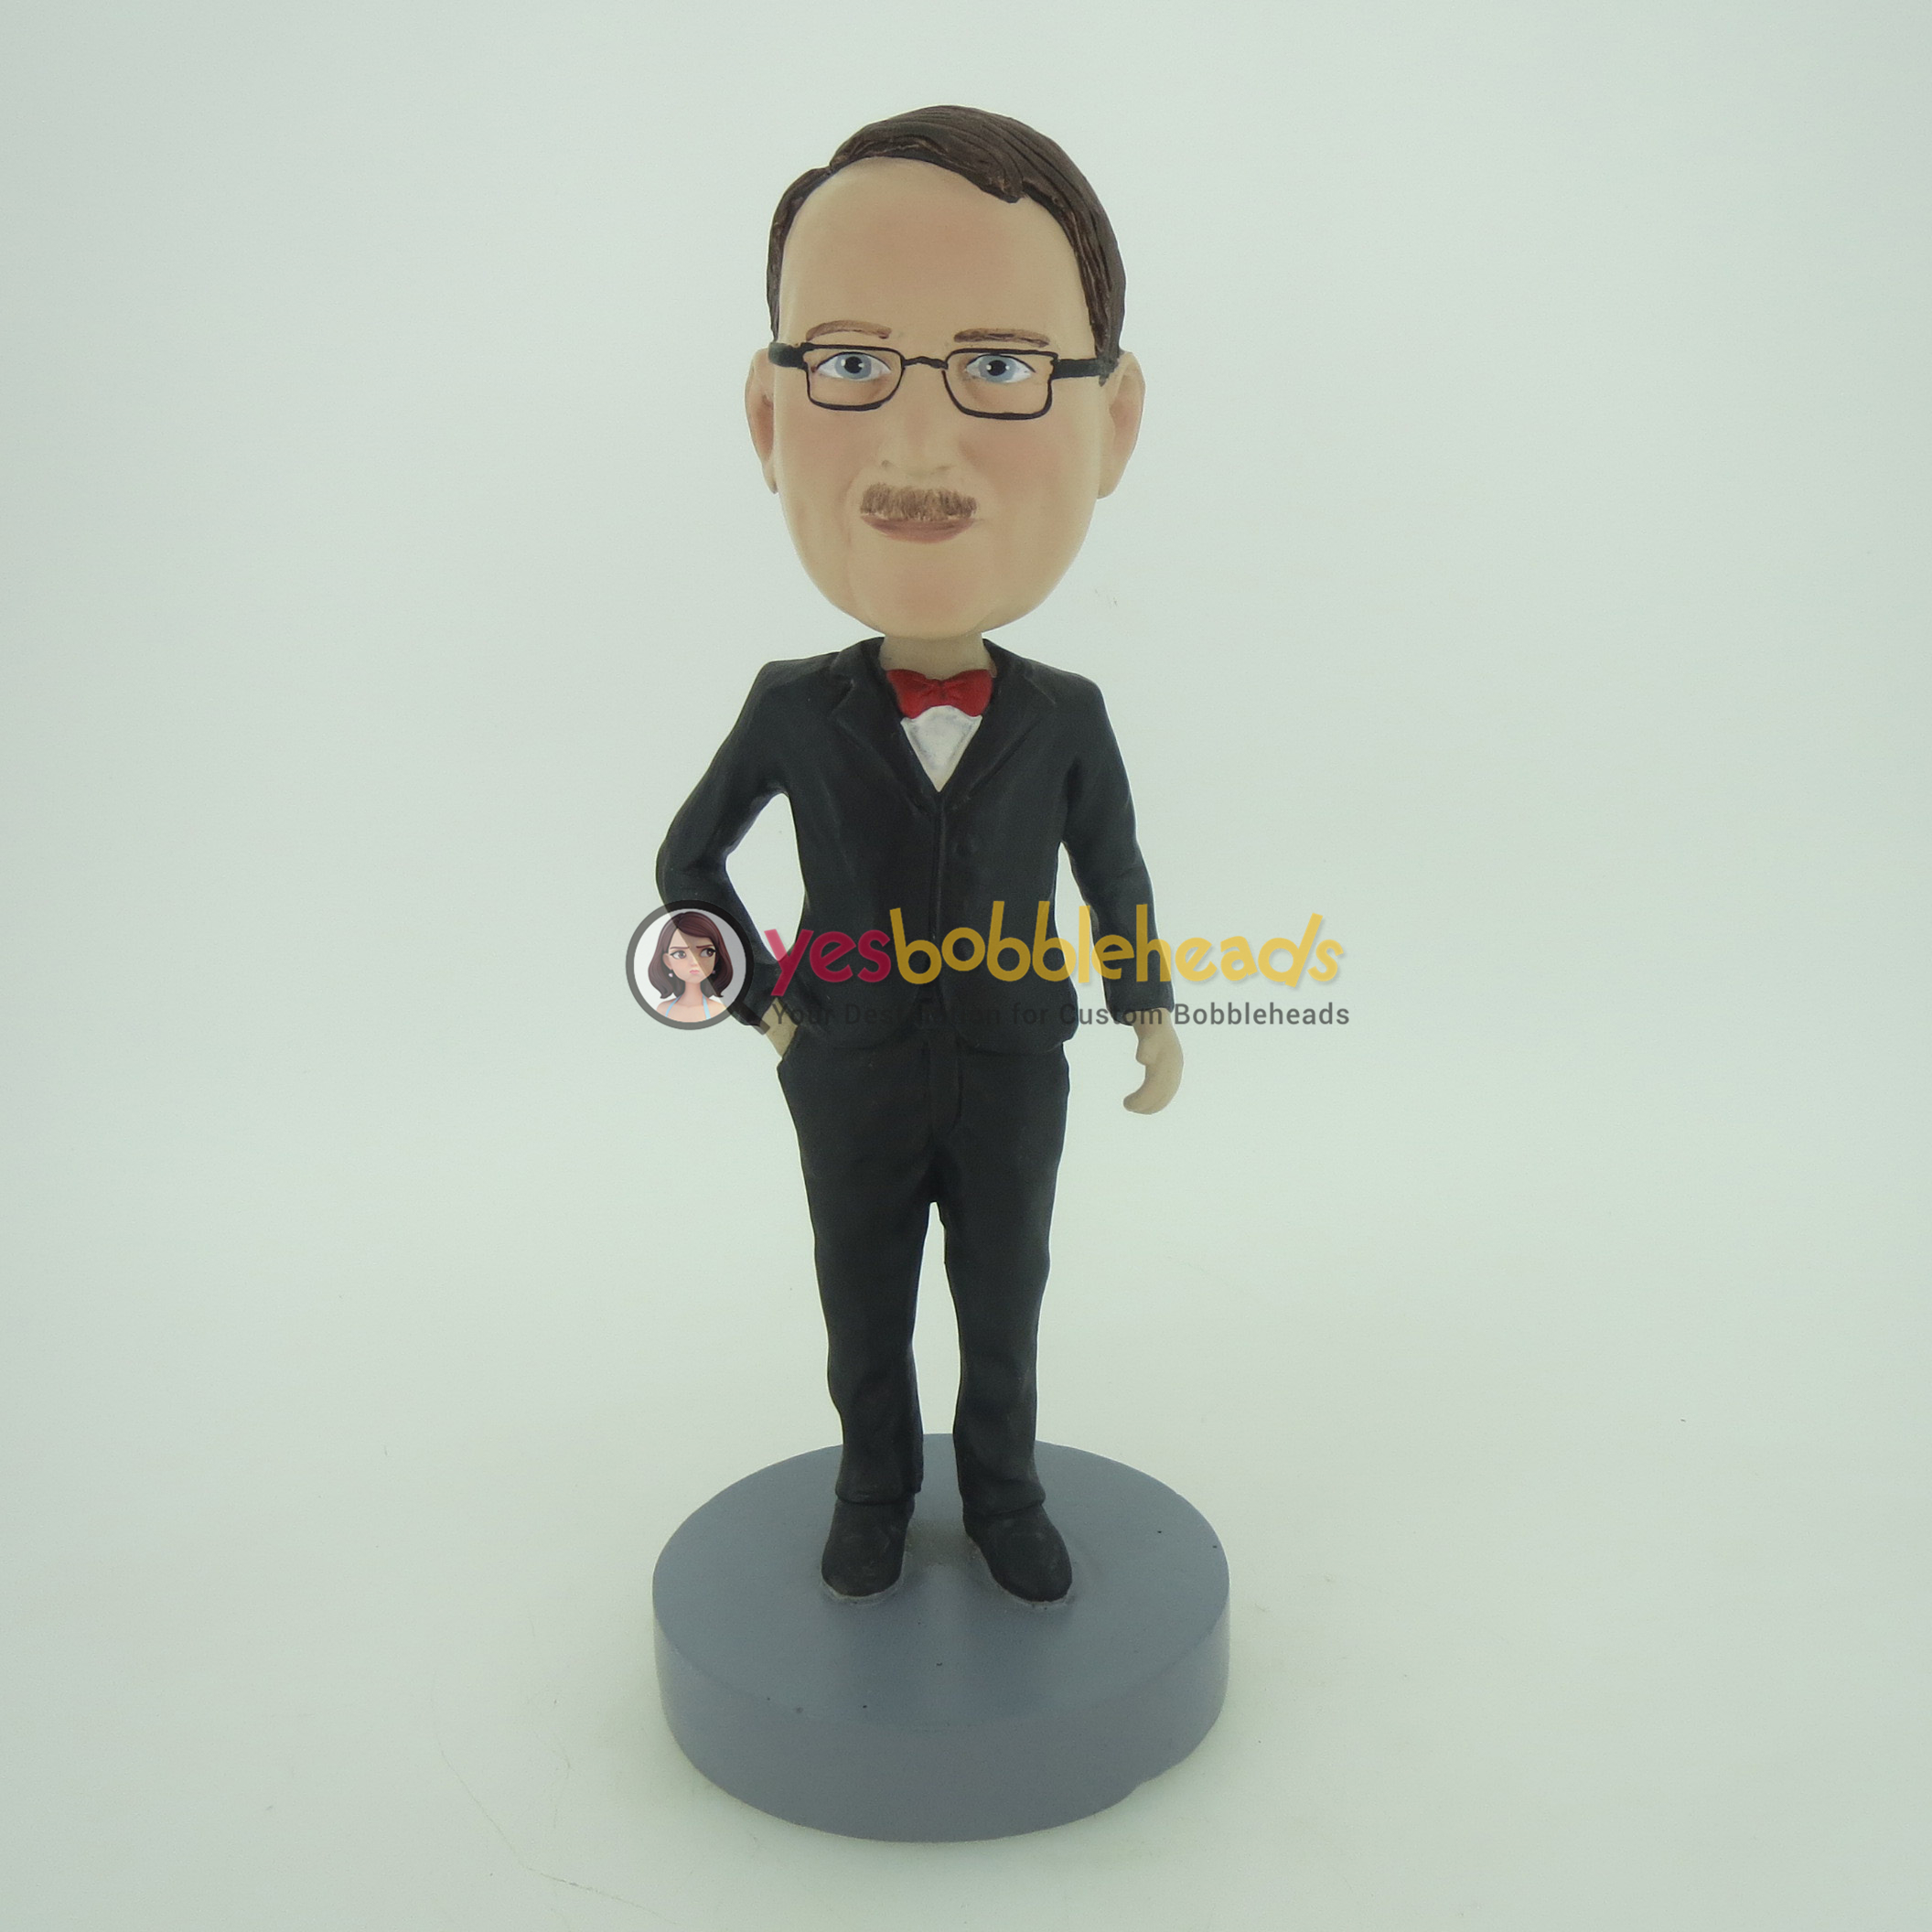 Picture of Custom Bobblehead Doll: Man In Black Suit And Red Bow